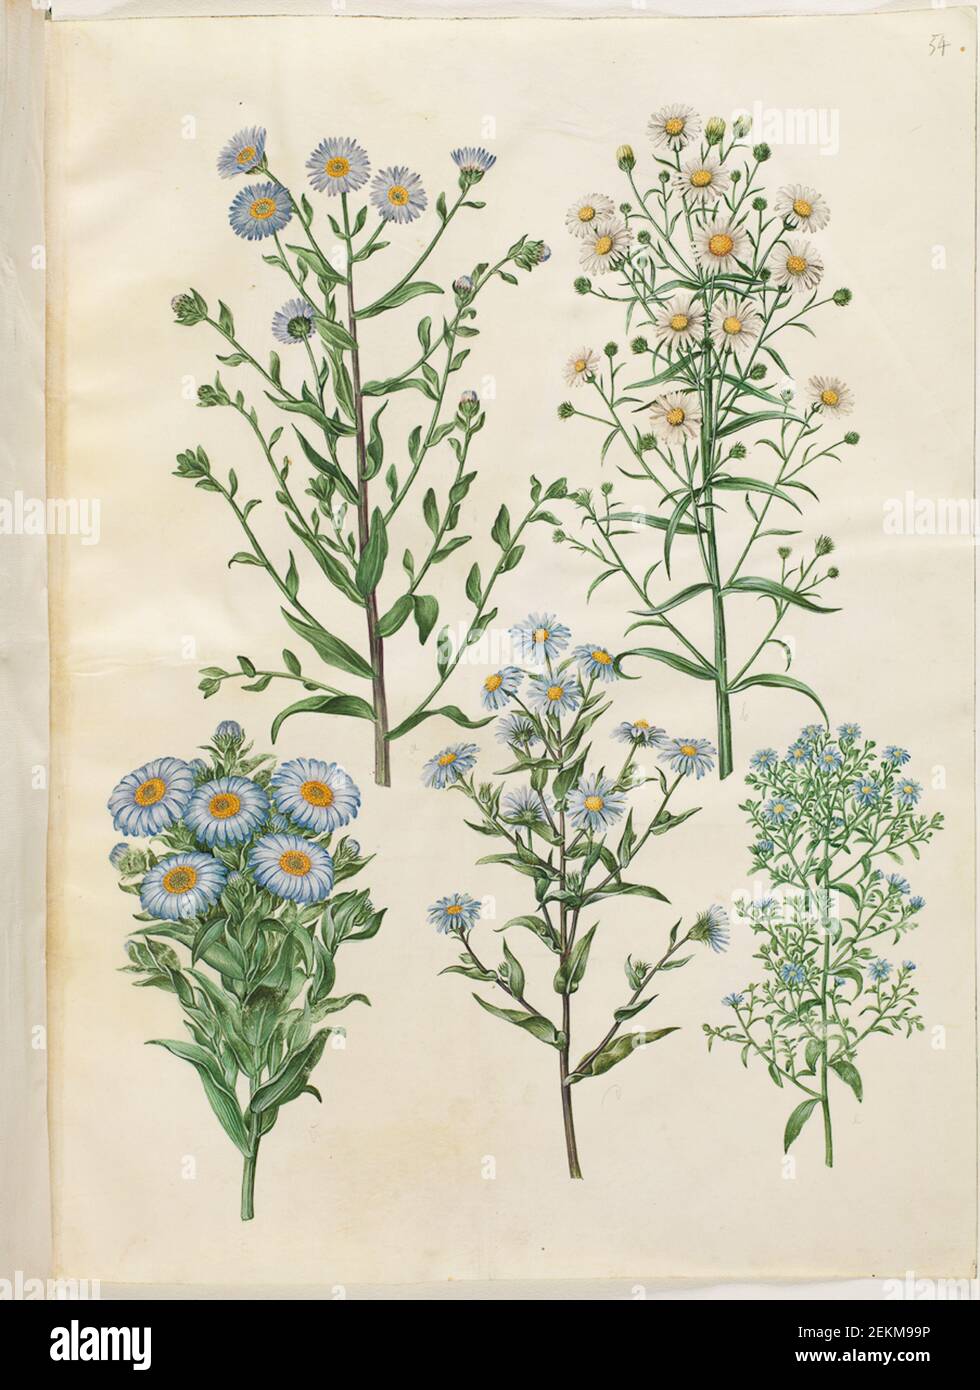 Holtzbecker bans, Simon (1620-1671); Maria Sibylla Merian (1647-1717), Aster (I-asters); Aster new-Belgium (nybelgisk asters); Aster-New England (nyengelsk asters); Aster dumosum (pudet-asters); Aster erieoides (Lynge-asters), 1649-1659 Stock Photo